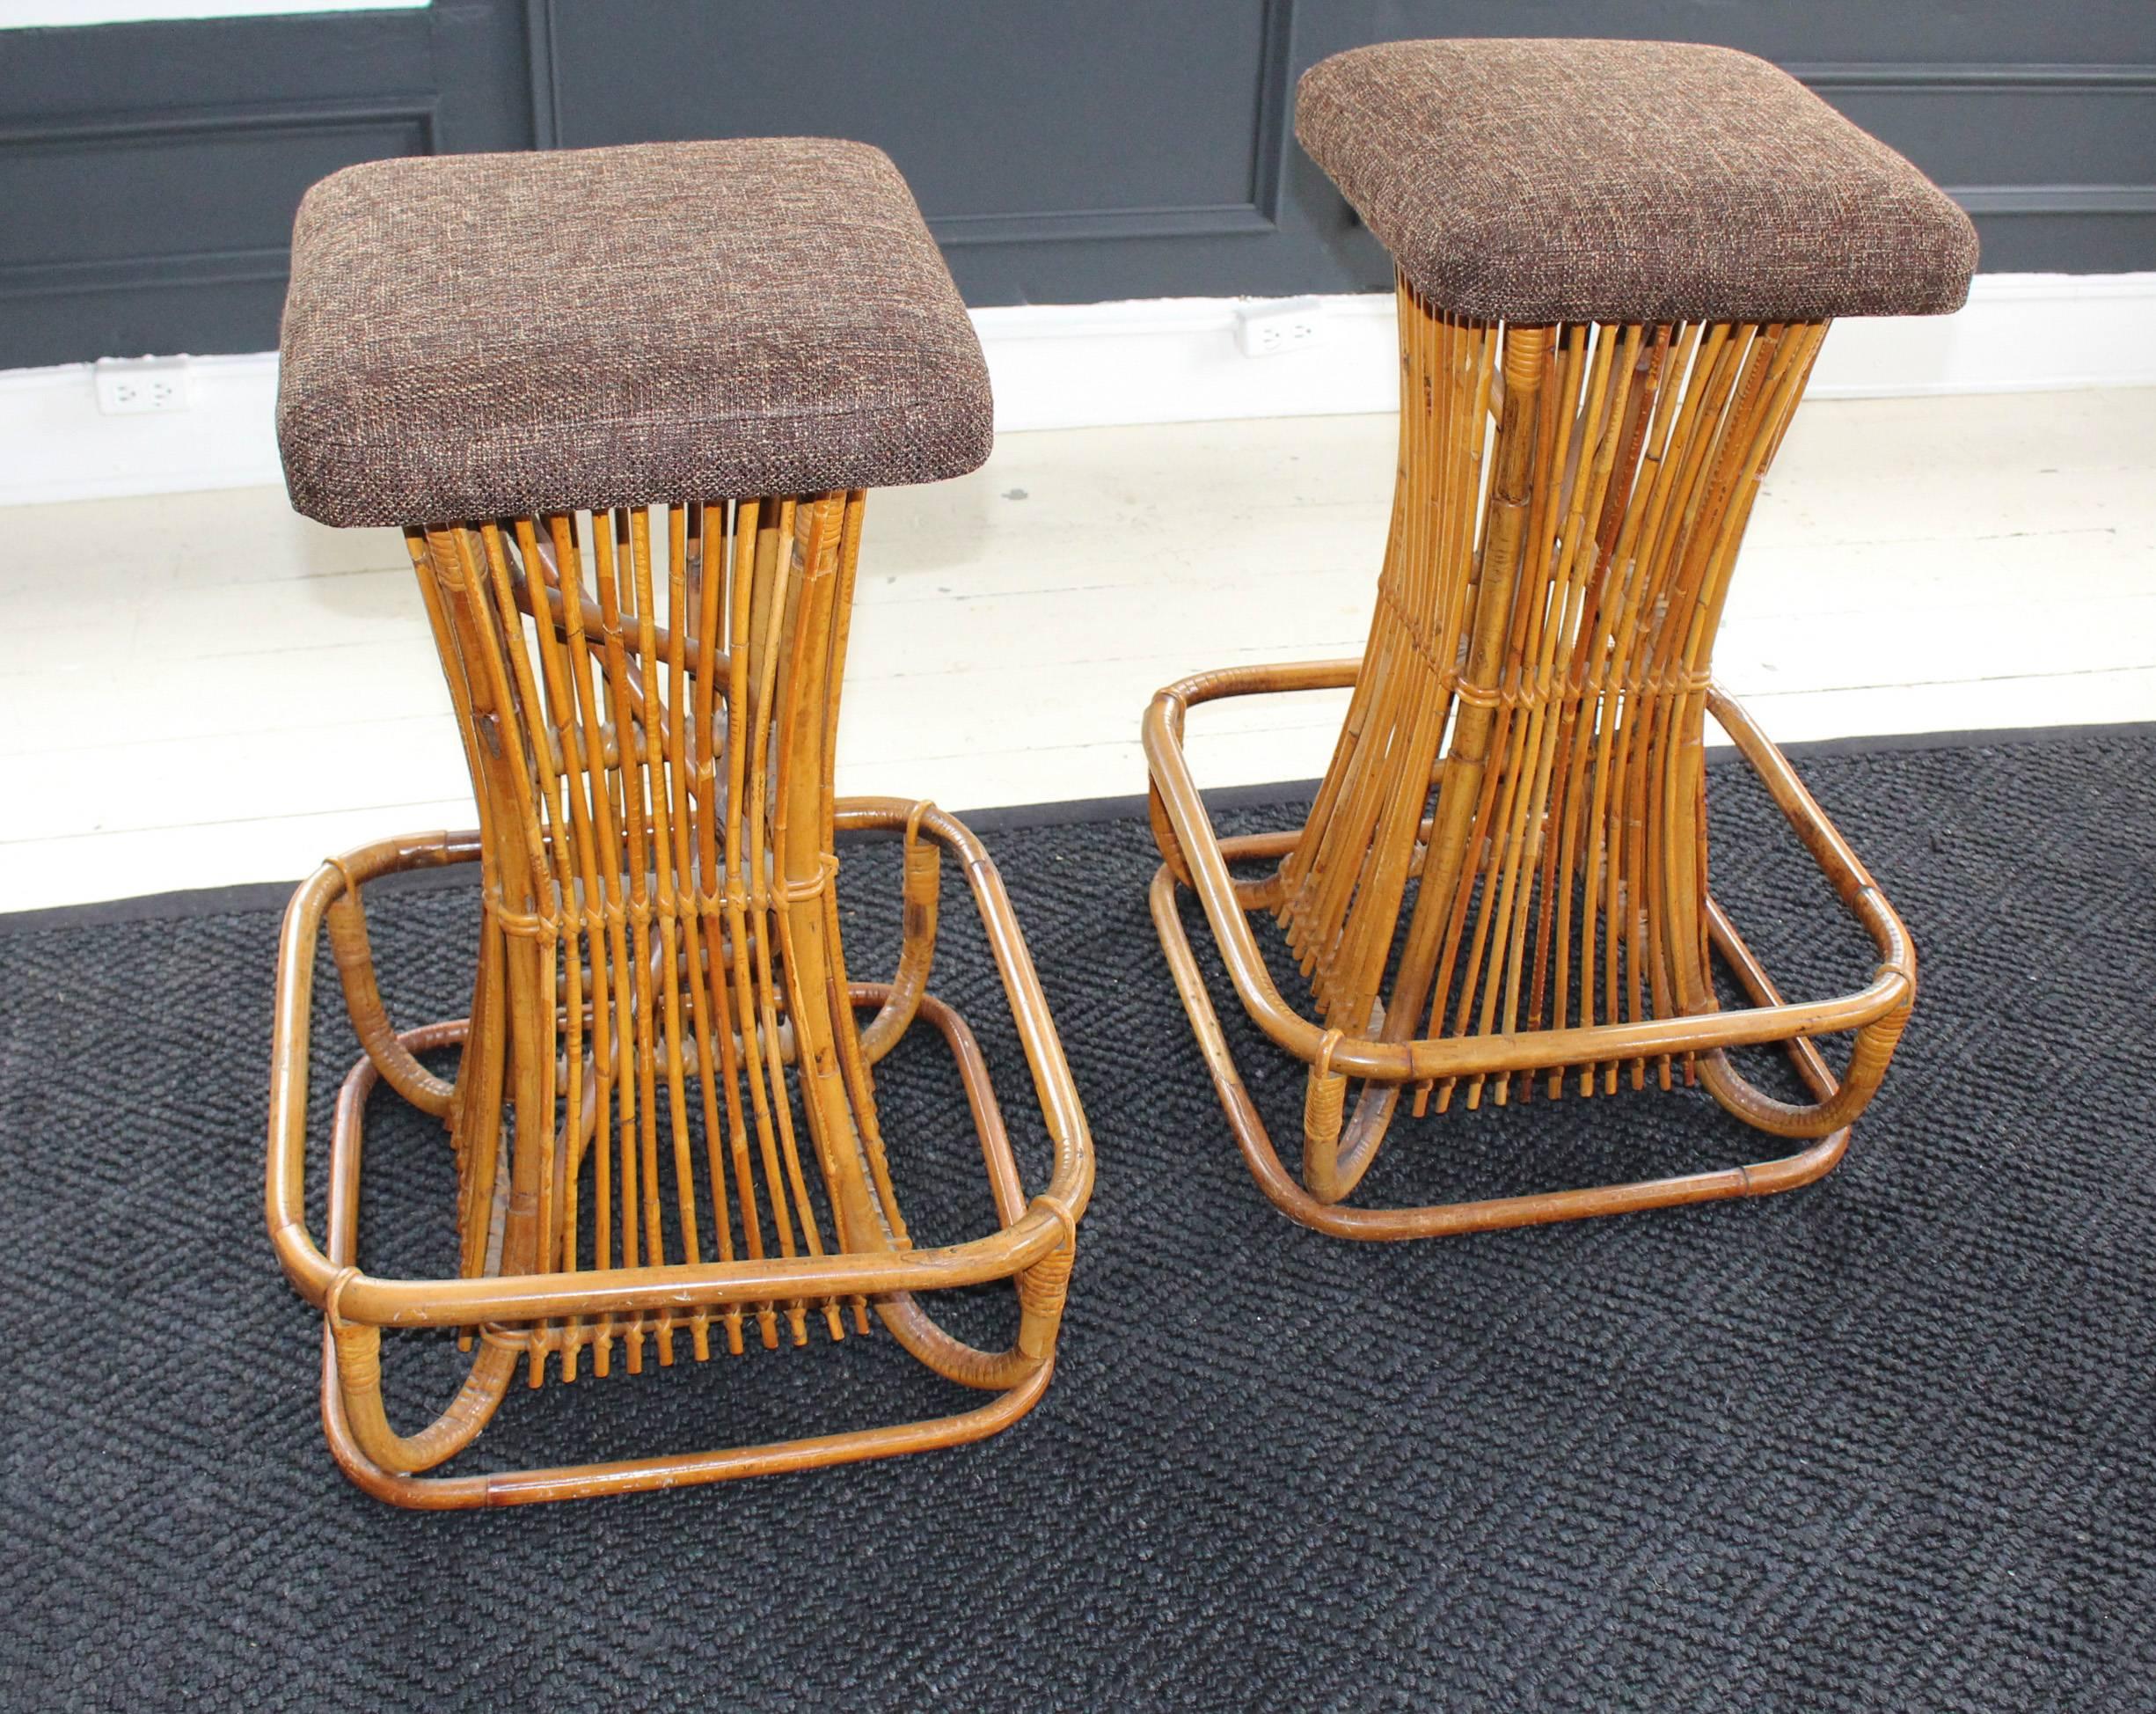 Pair of rattan Franco Albini stools, 1950s, Italy, with generous footrest and newly upholstered perch in a brown tweed with a Mid-Century feel.